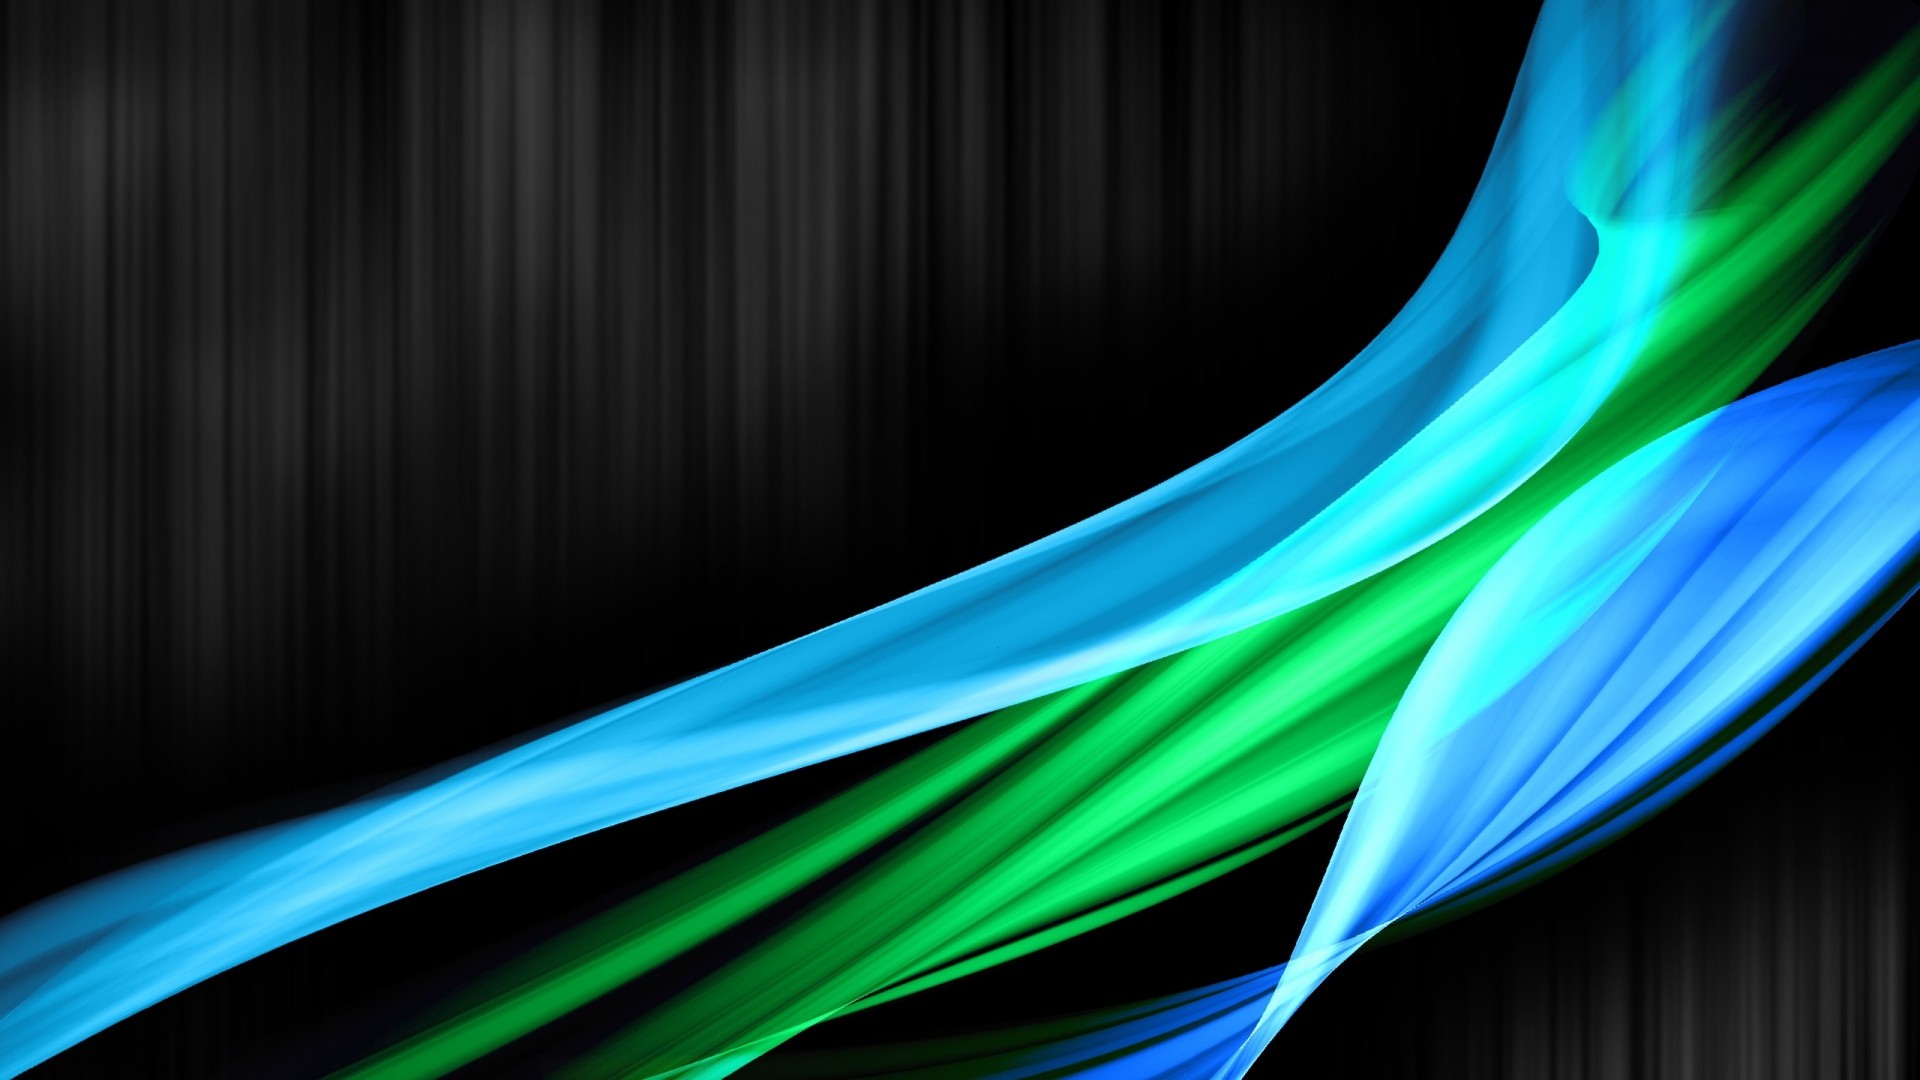 1920x1080 rays_bright_colorful_light_background_16321_.jpg